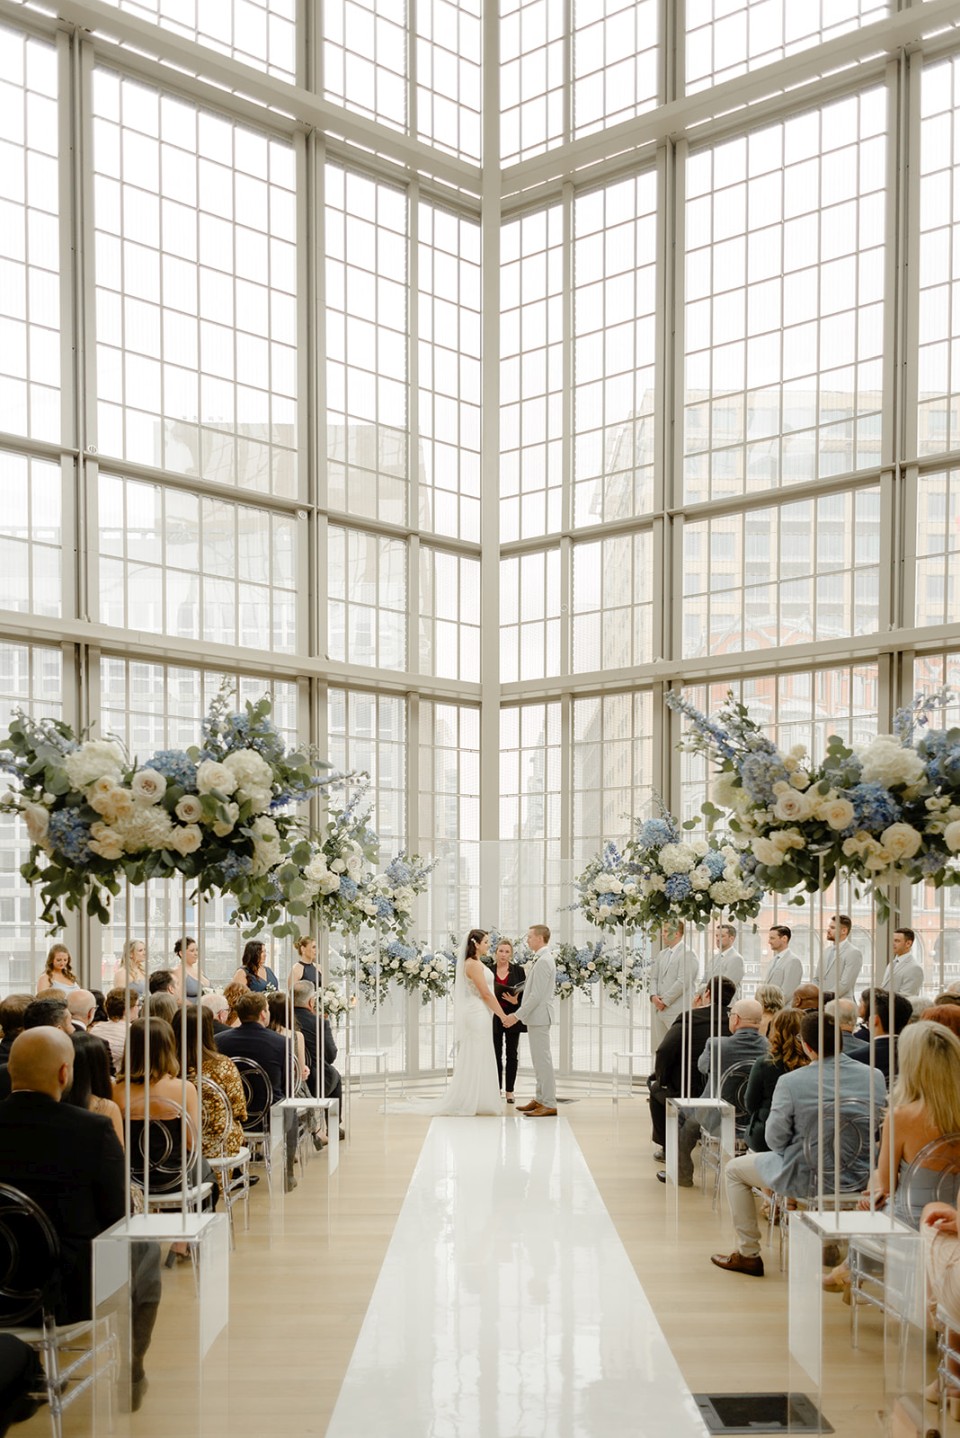 National Arts Centre Lantern Room - Rubicon Photography | Erica Irwin Weddings and Events